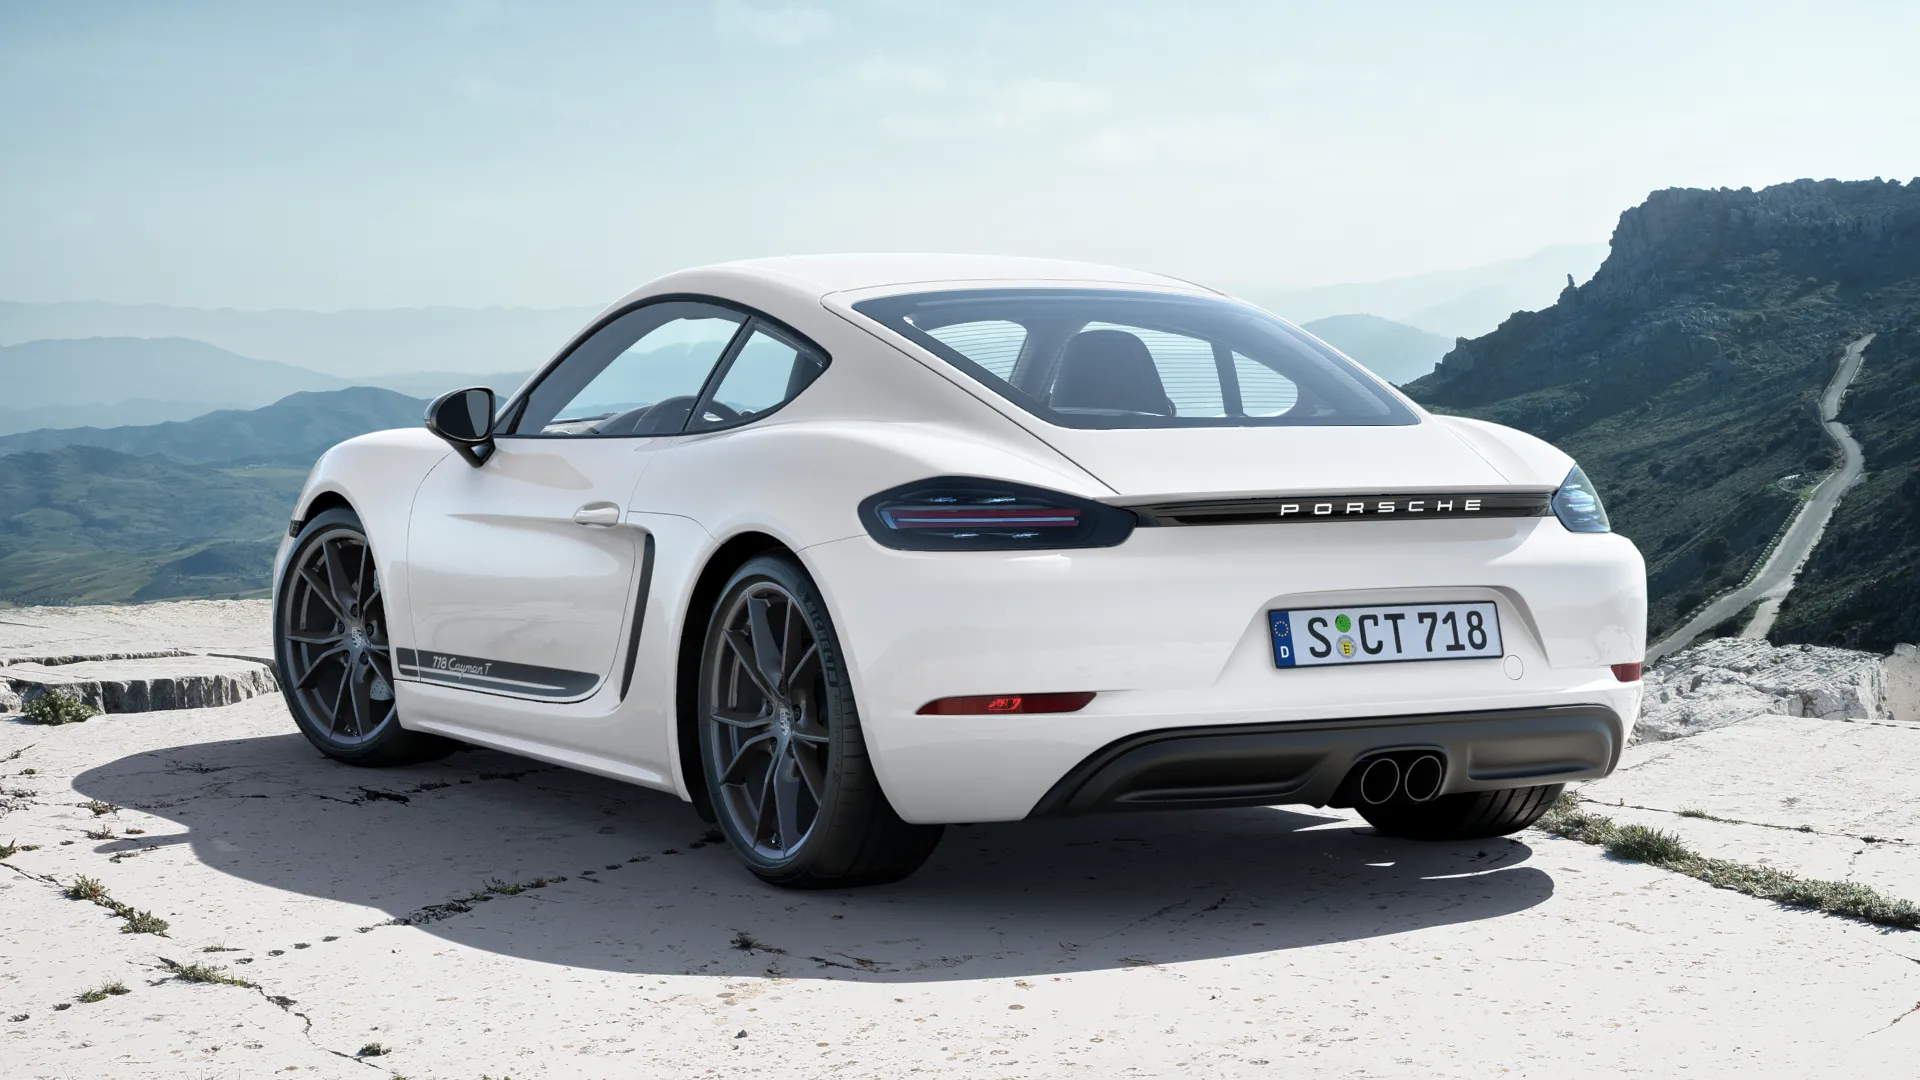 Exterior view of 718 Cayman T